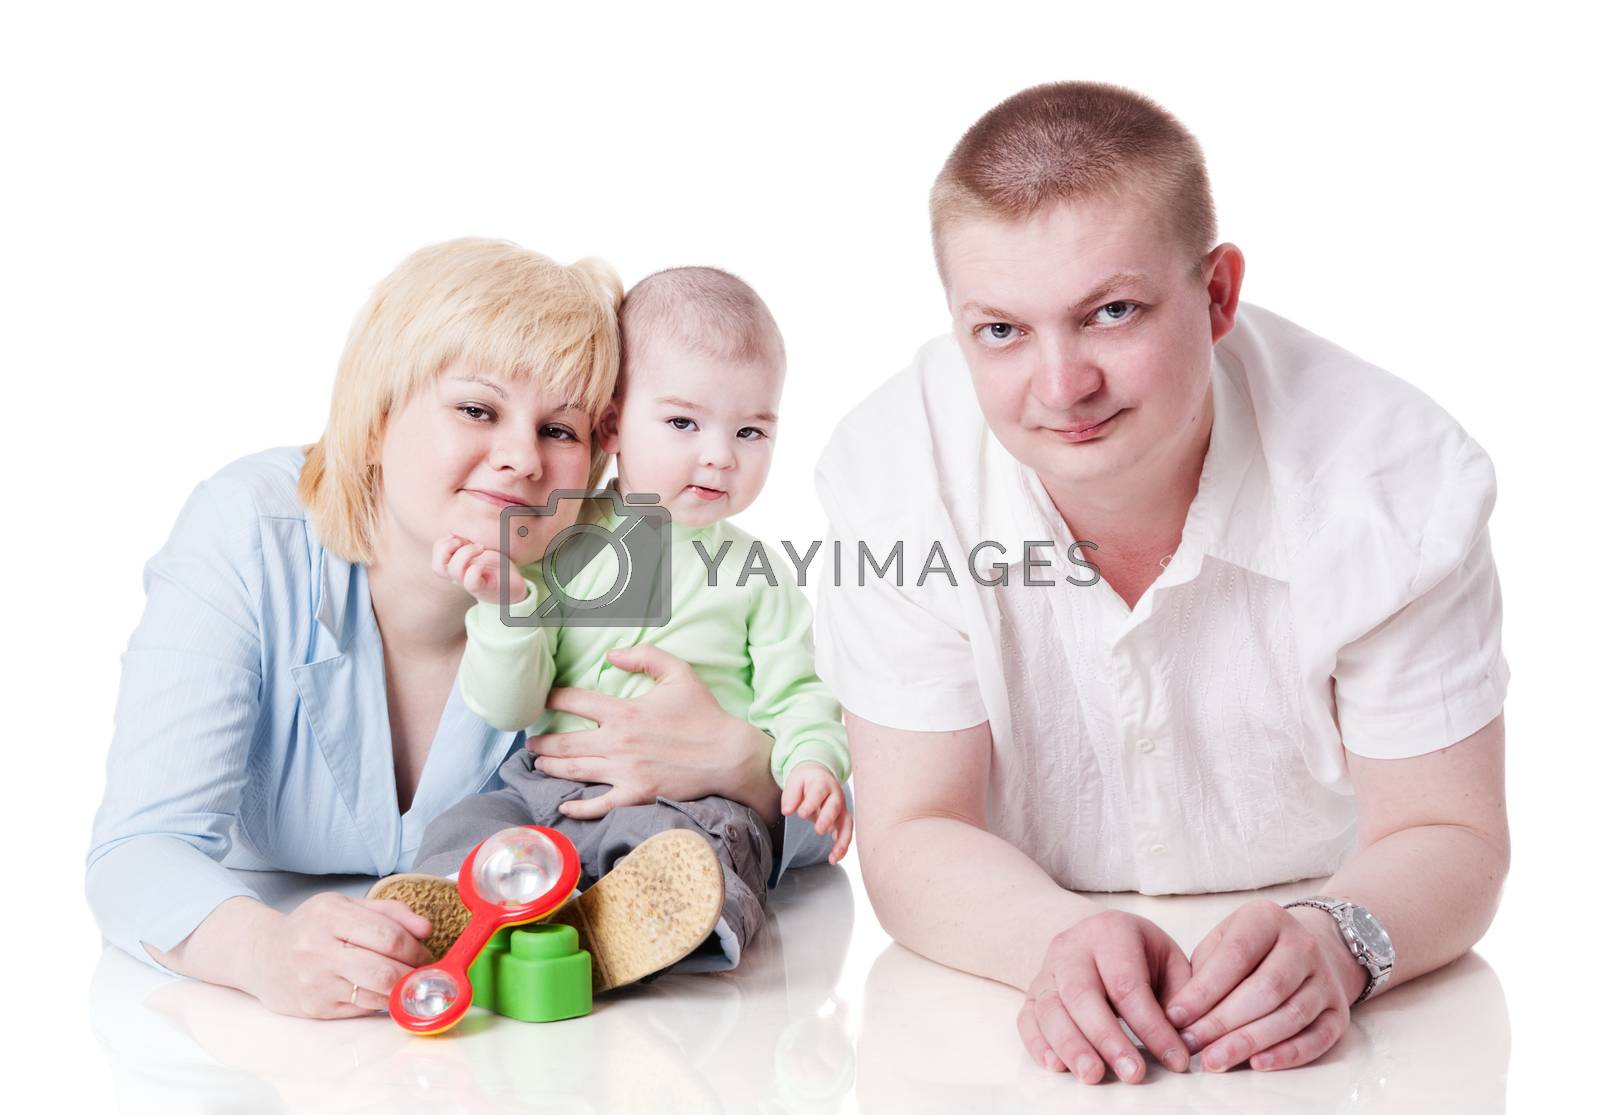 Royalty free image of Happy Family with toddler by olga_sweet